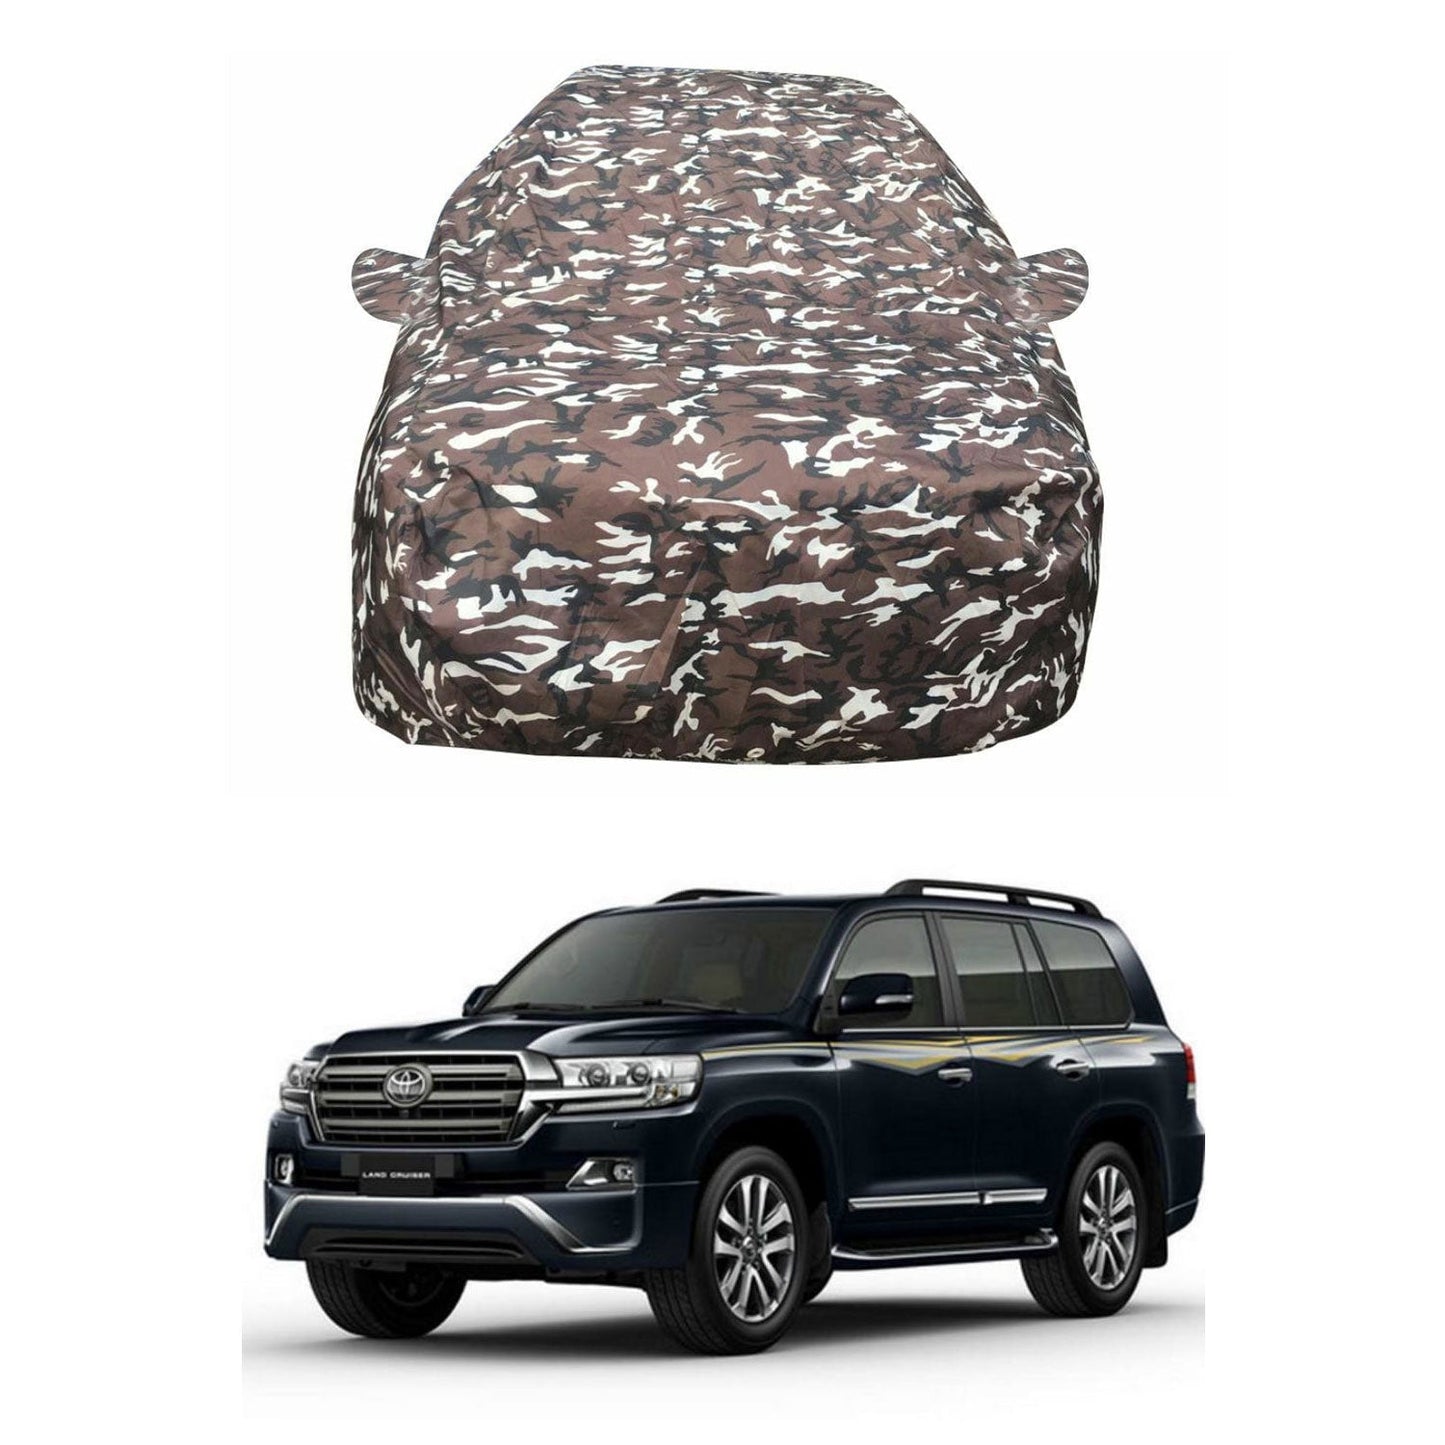 Oshotto Ranger Design Made of 100% Waterproof Fabric Car Body Cover with Mirror Pockets For Toyota Land Cruiser 200